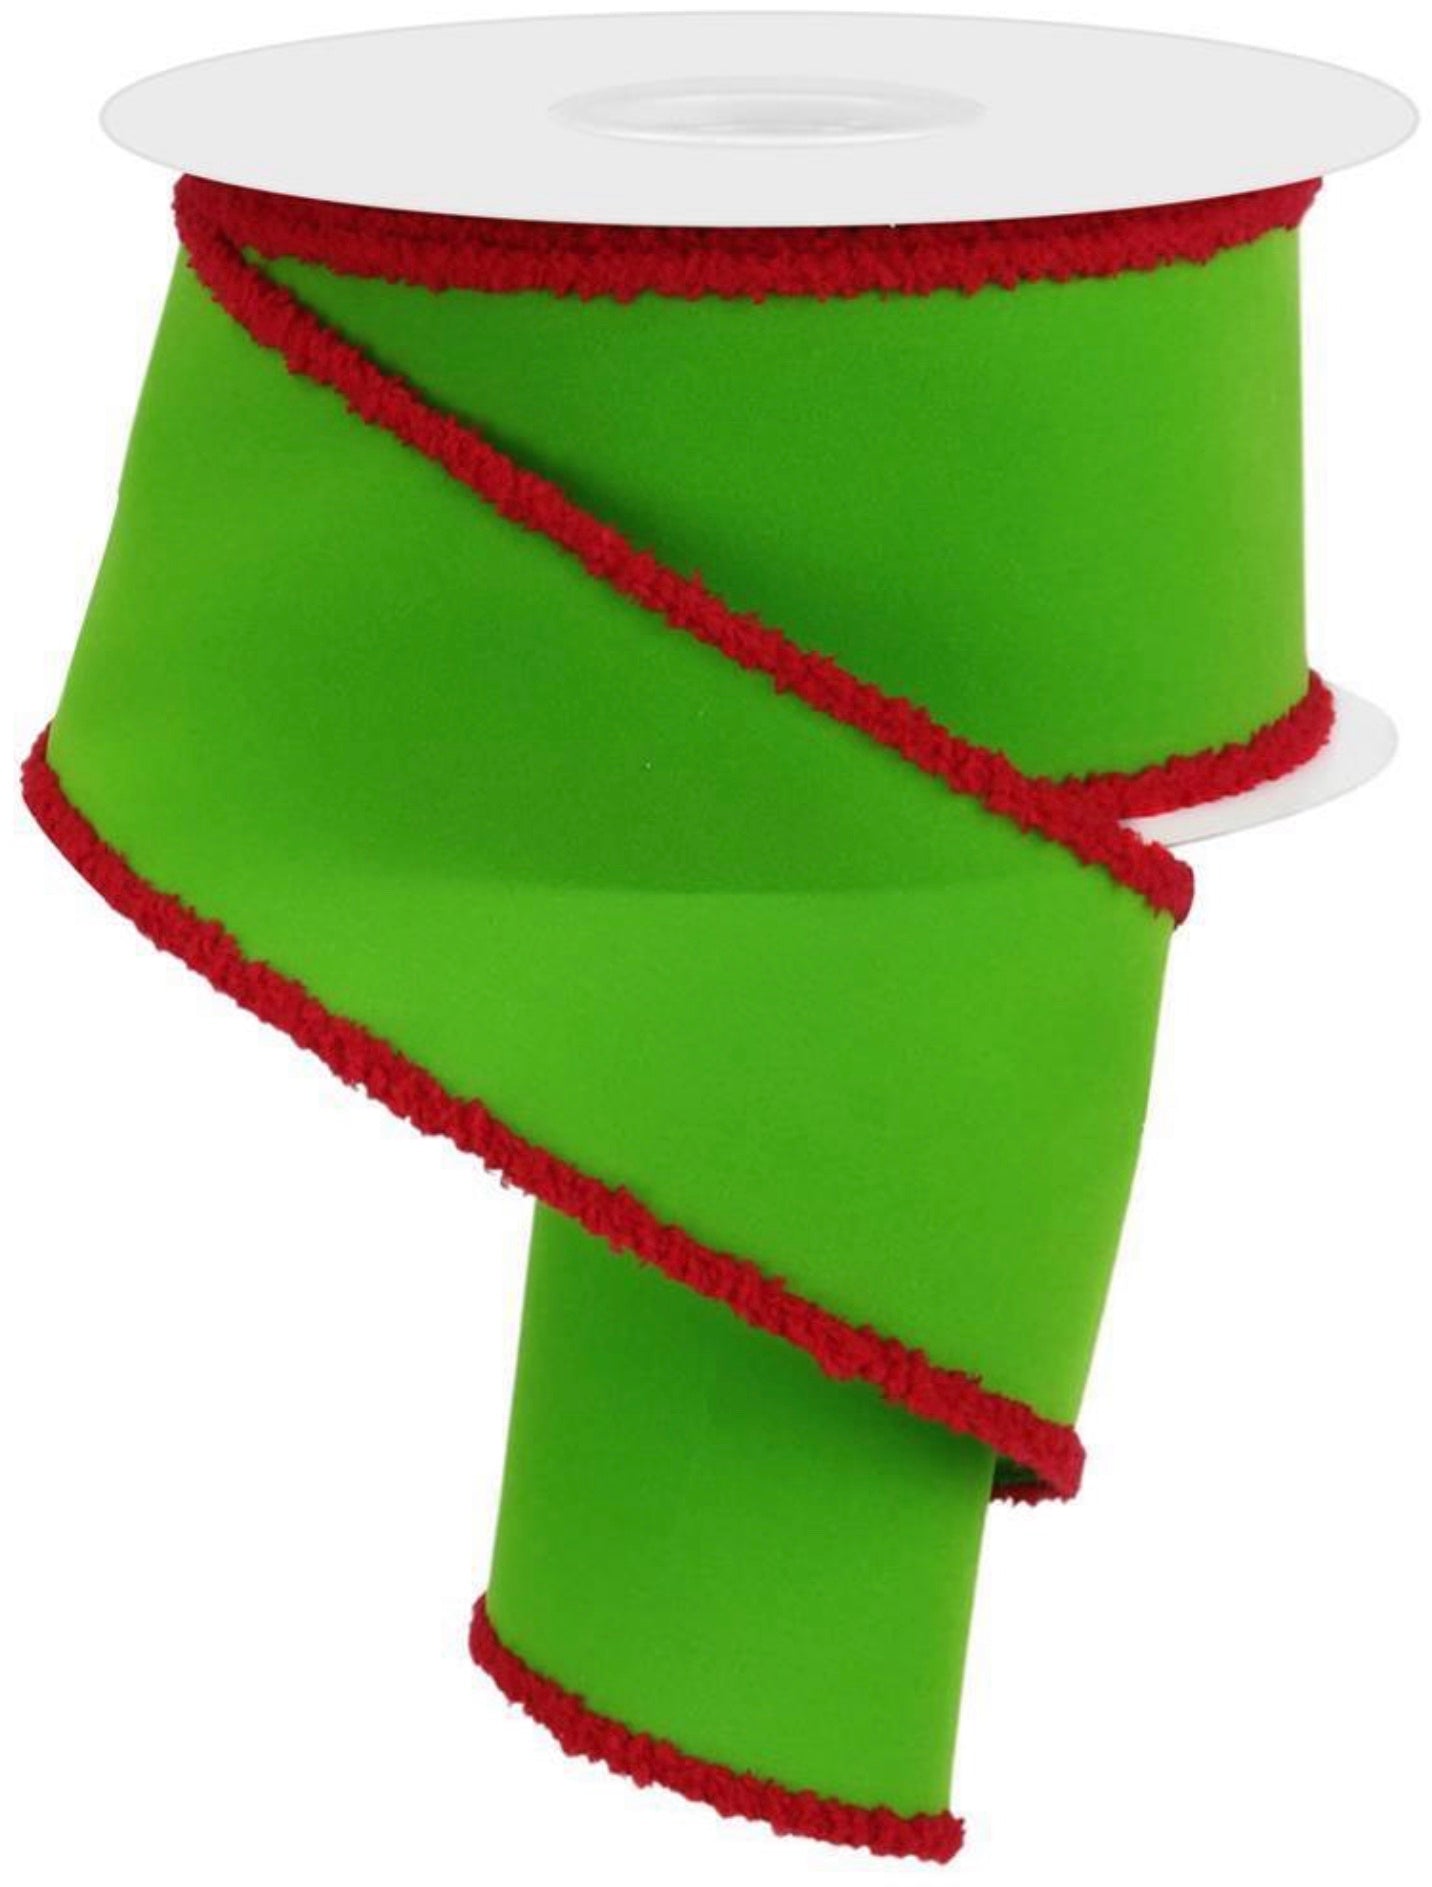 10 Yards - 2.5” Wired Lime Green Velvet Ribbon with Red Drift Edge